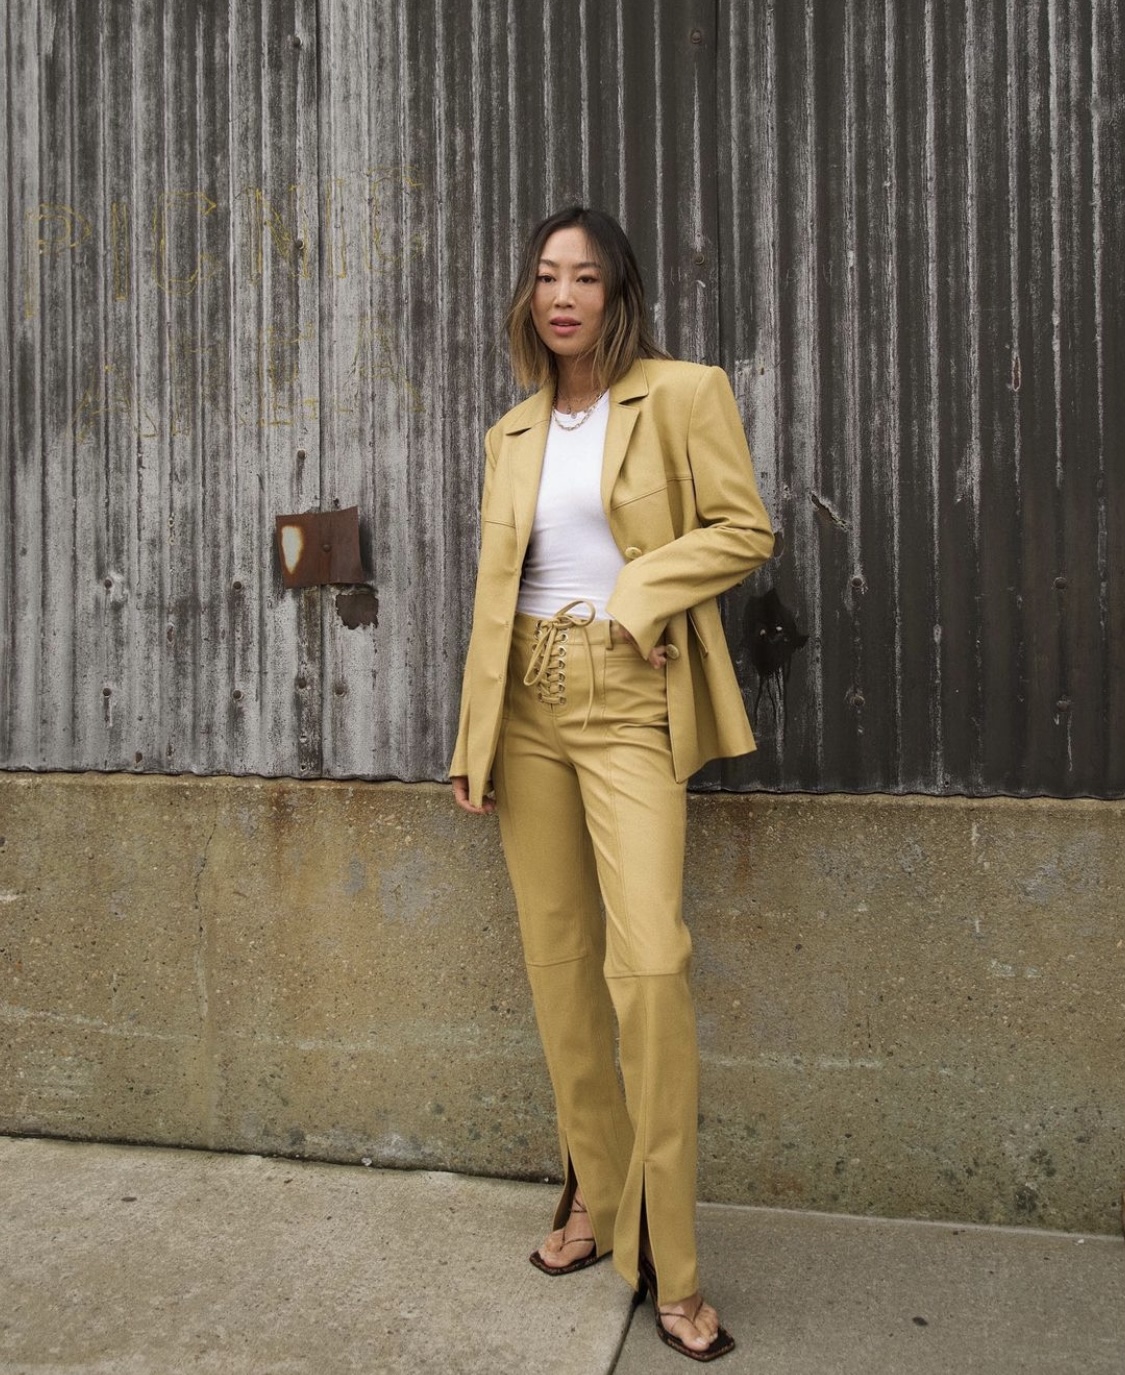 The best leather jackets: @aimeesong wears a leather blazer